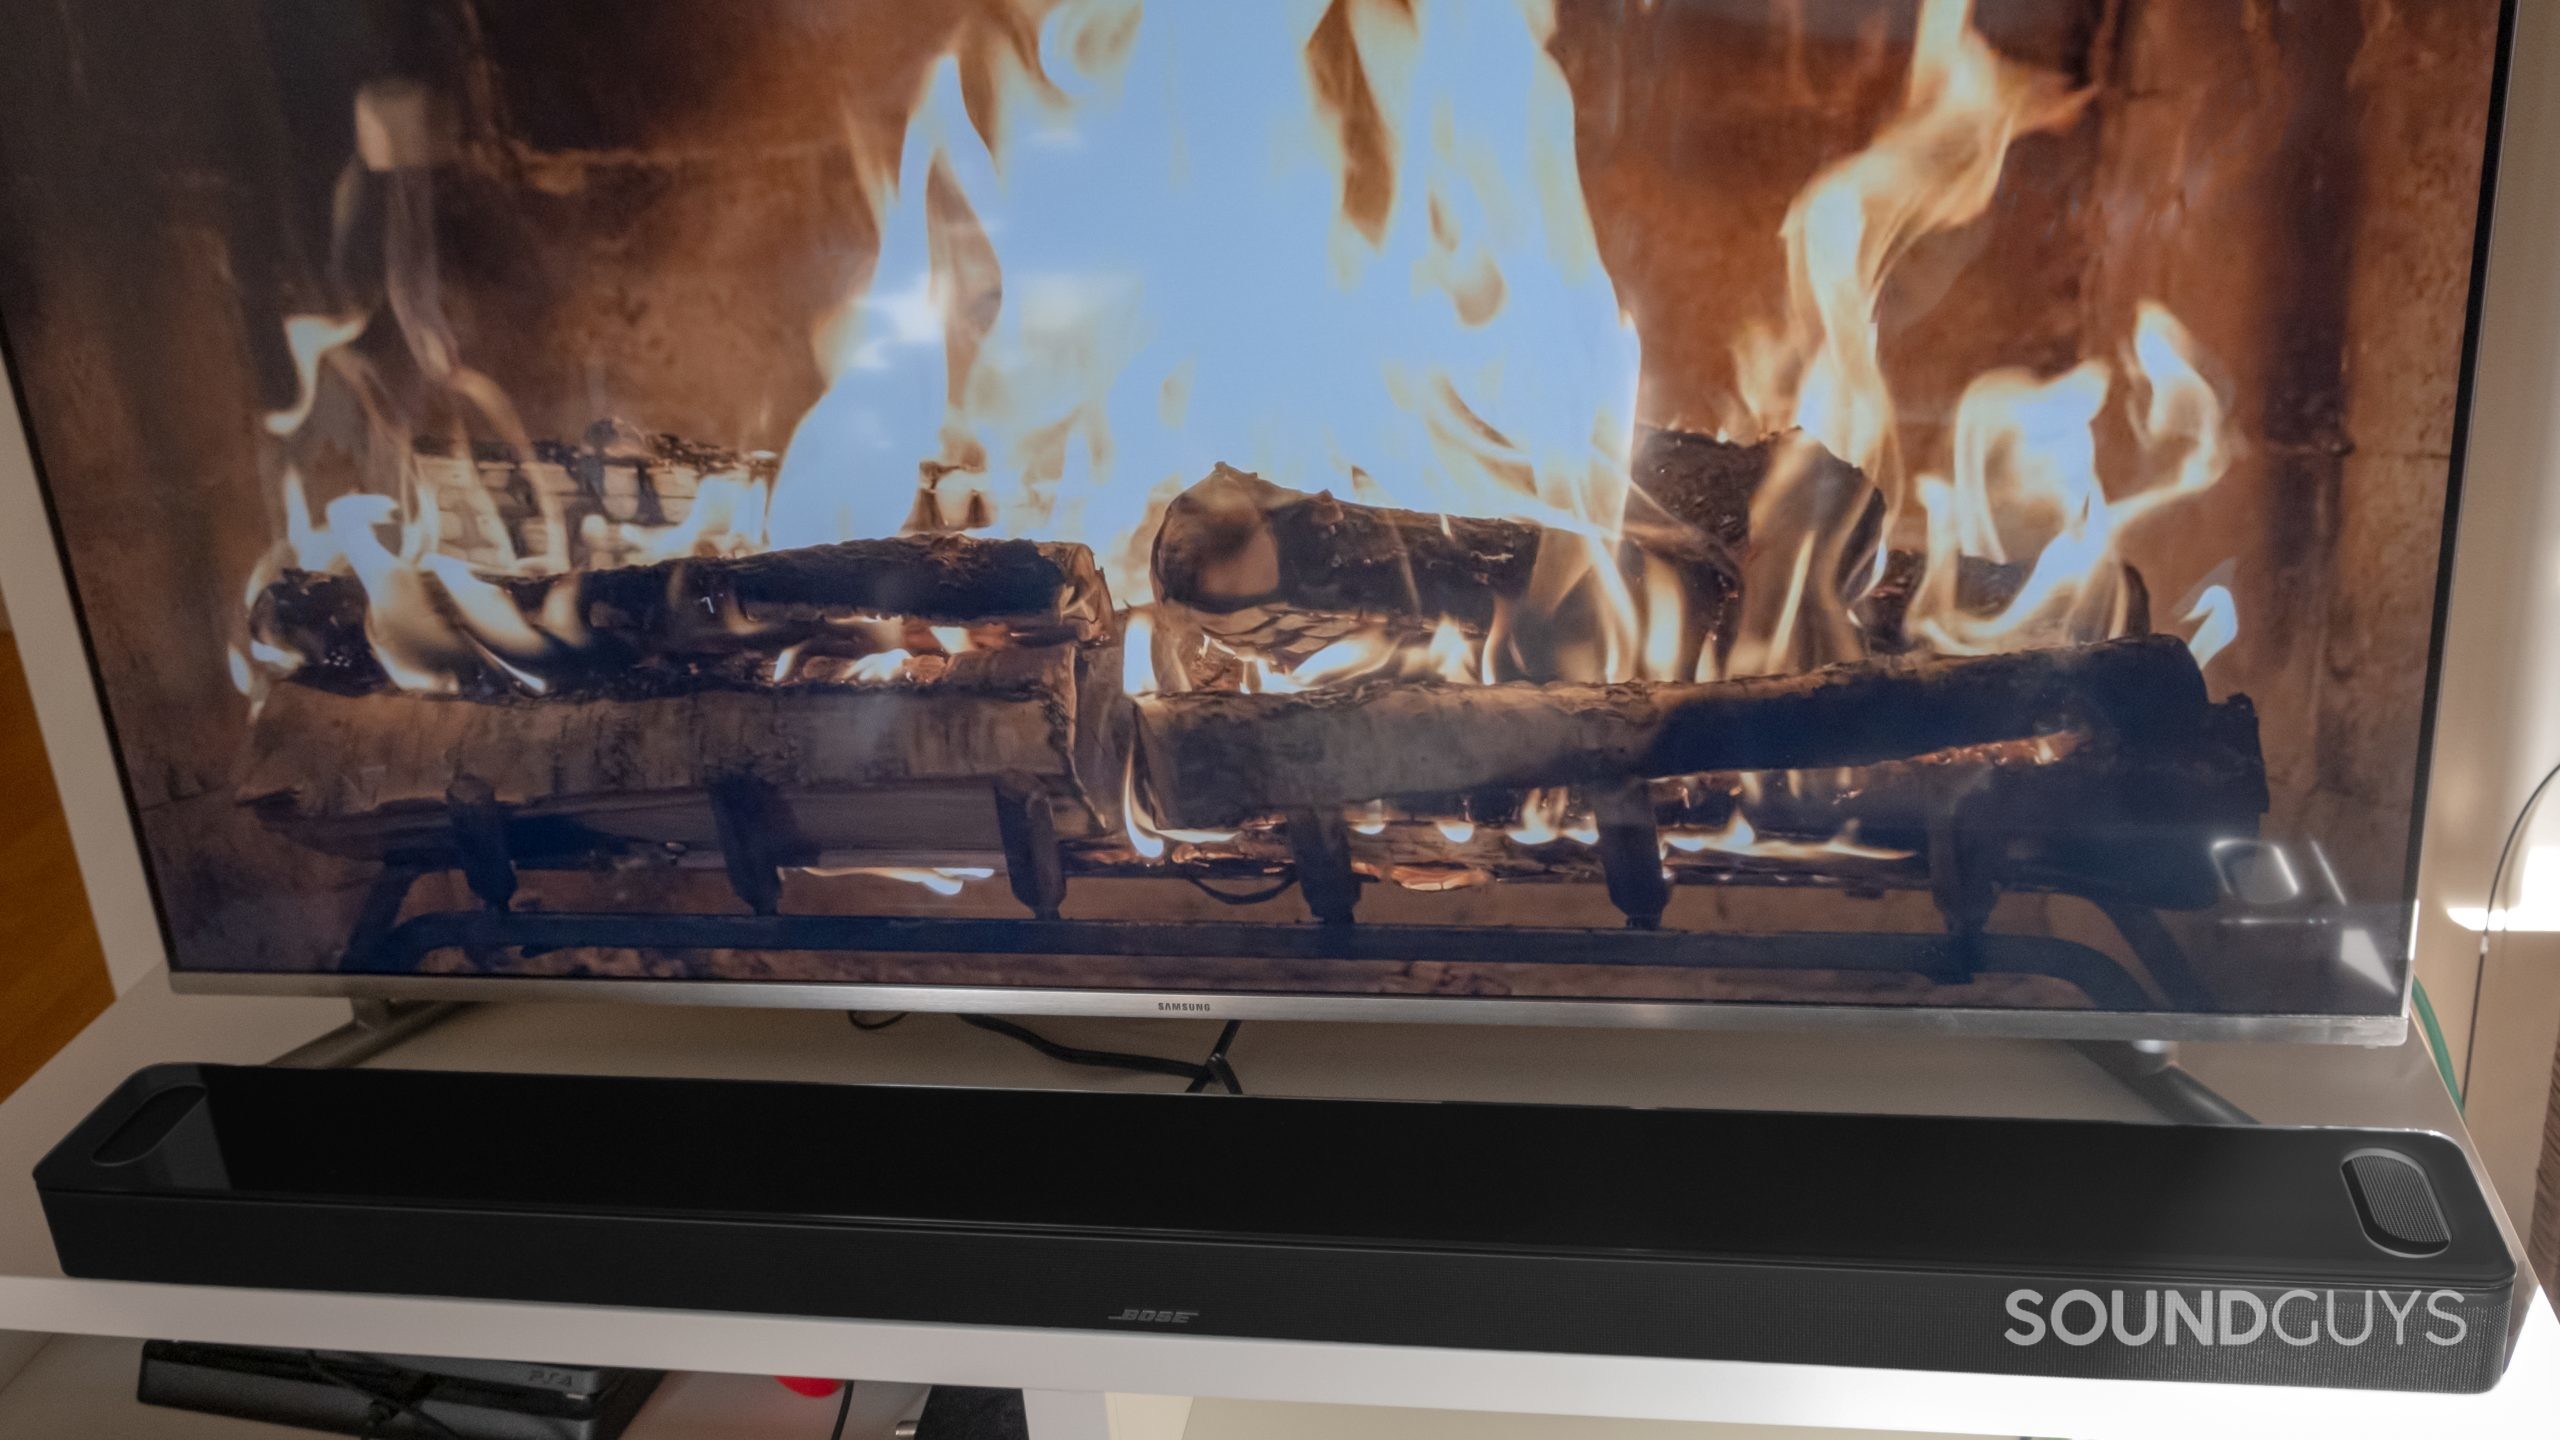 Image of a TV with a fireplace on screenthe Bose Smart Soundbar 900 in front.